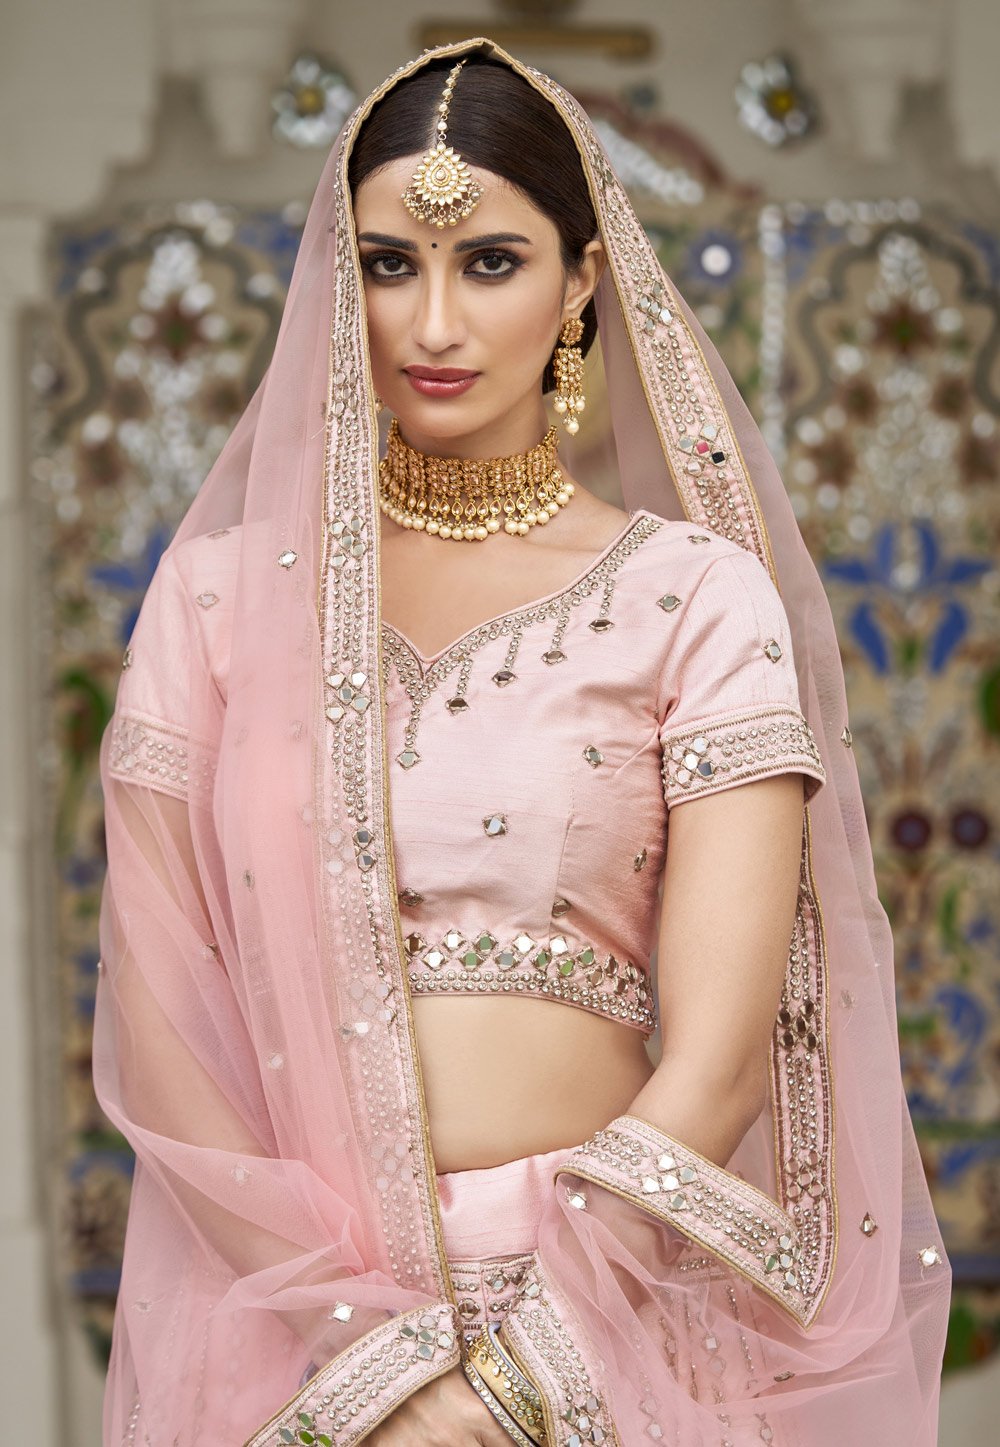 Buy Beige And Light Pink Lehenga And Choli With Beige Dupatta by Designer  VIKRAM PHADNIS Online at Ogaan.com